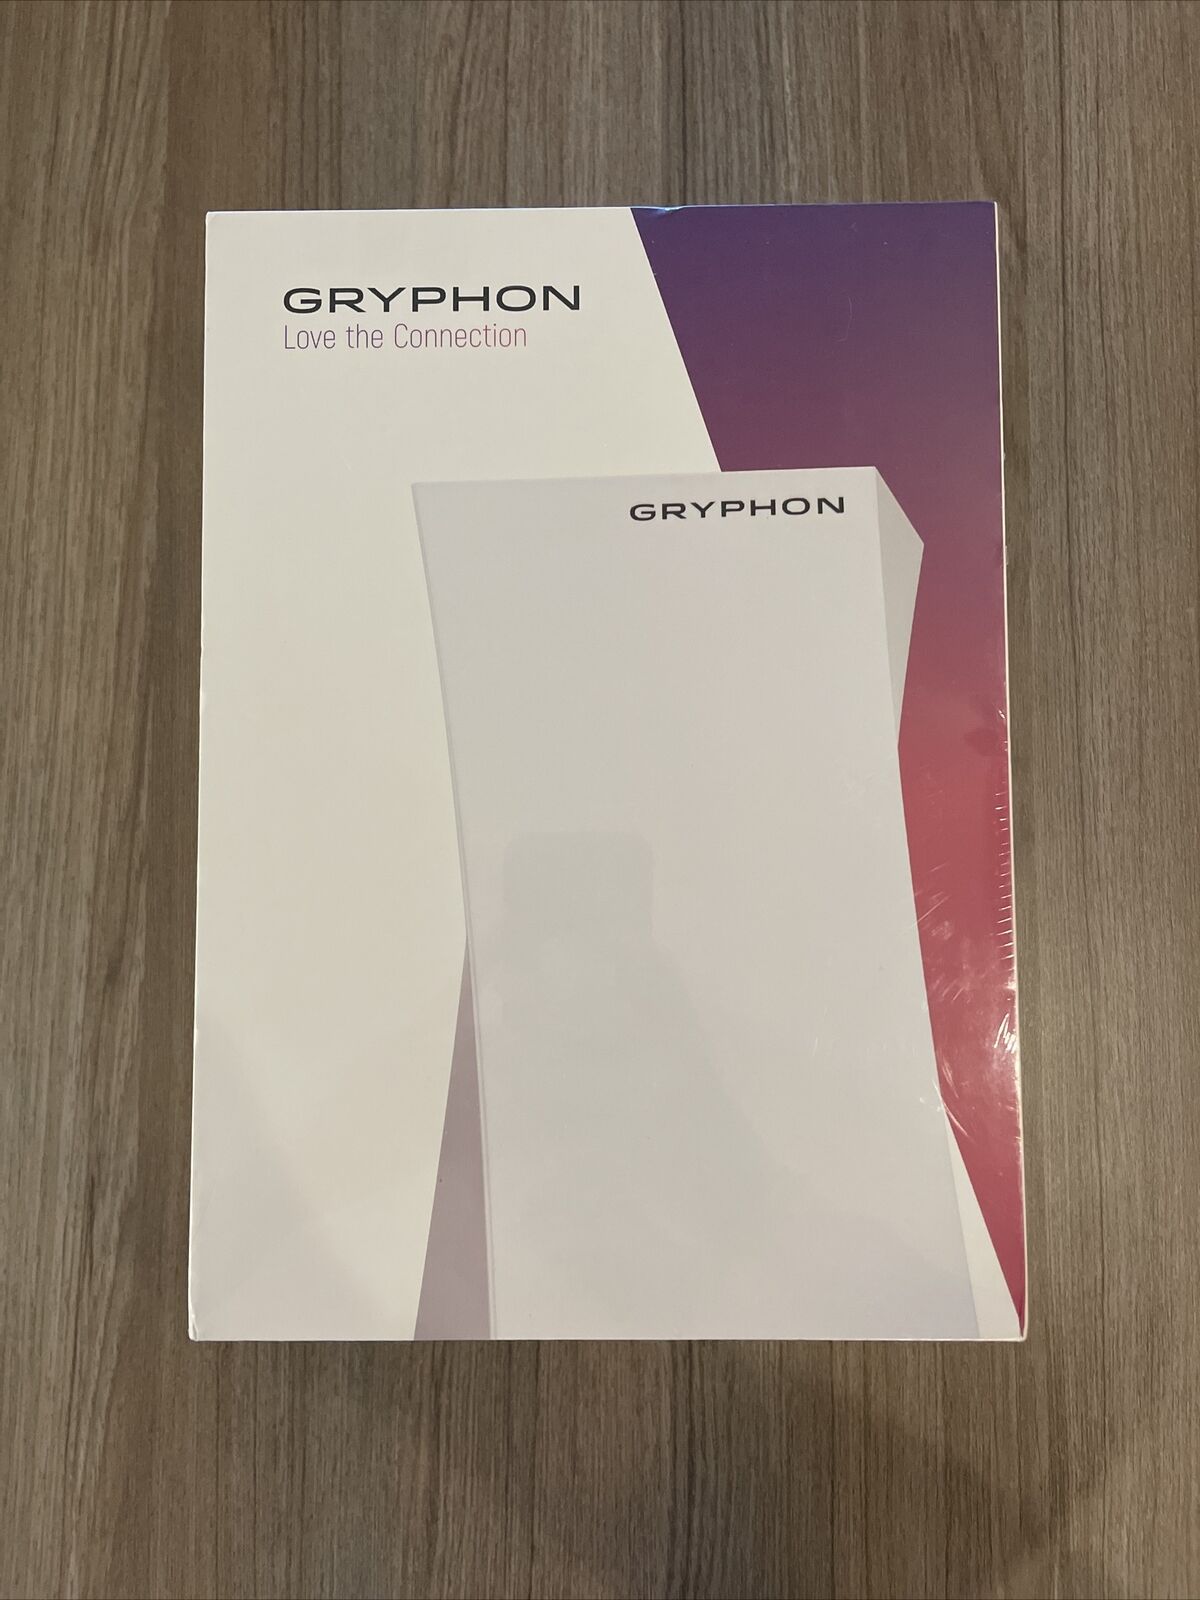 Gryphon Tower Super Fast Mesh WiFi Router GRYPH1 Parental Control Sealed New